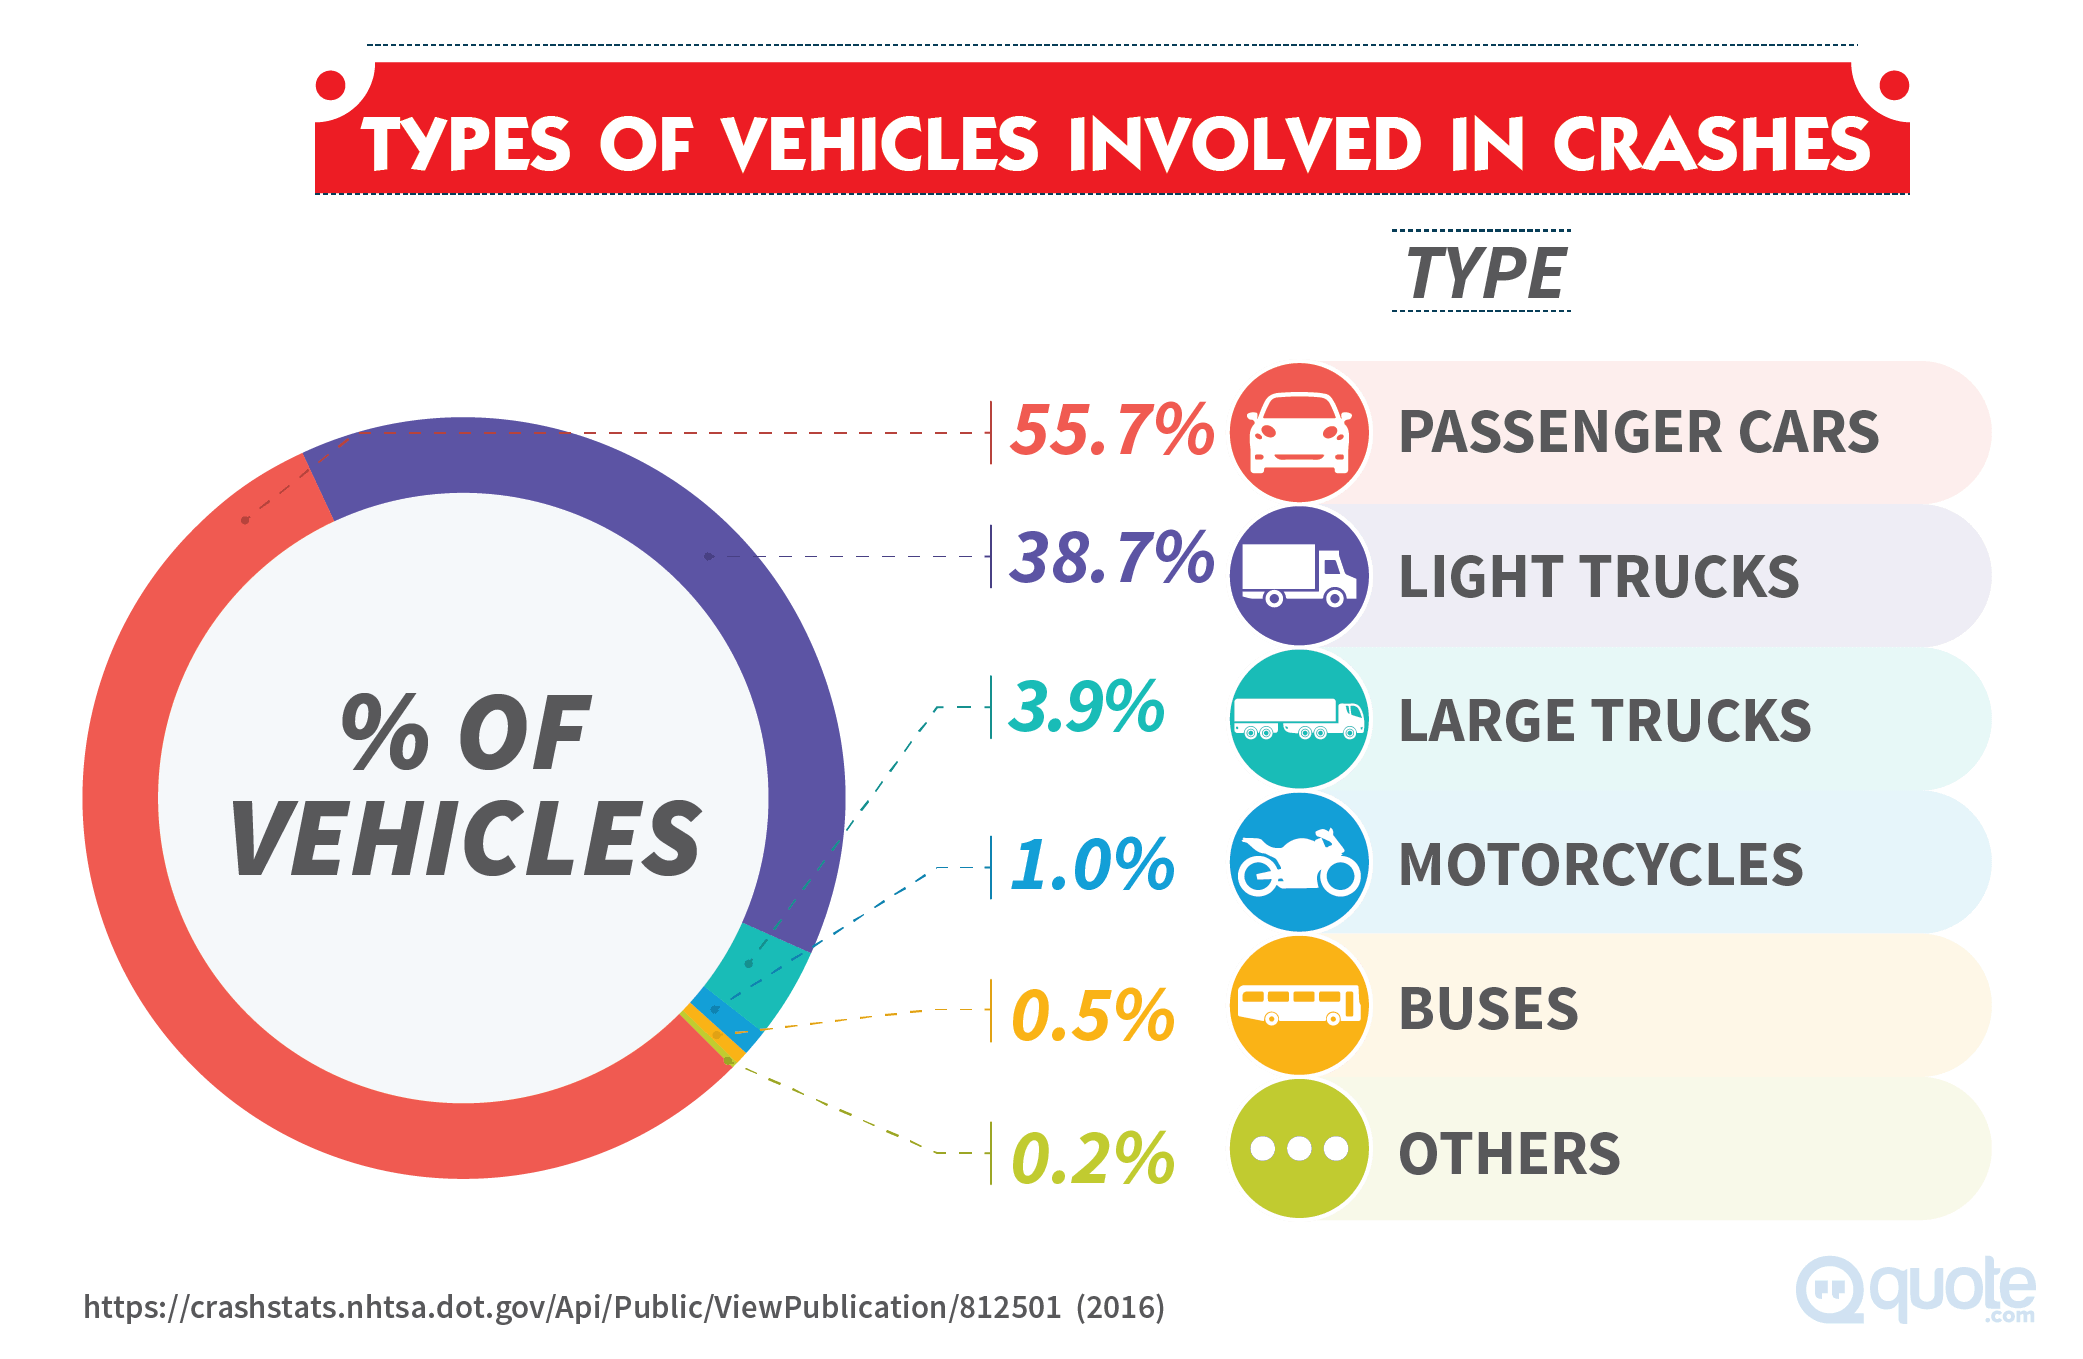 Types of vehicles involved in crashes